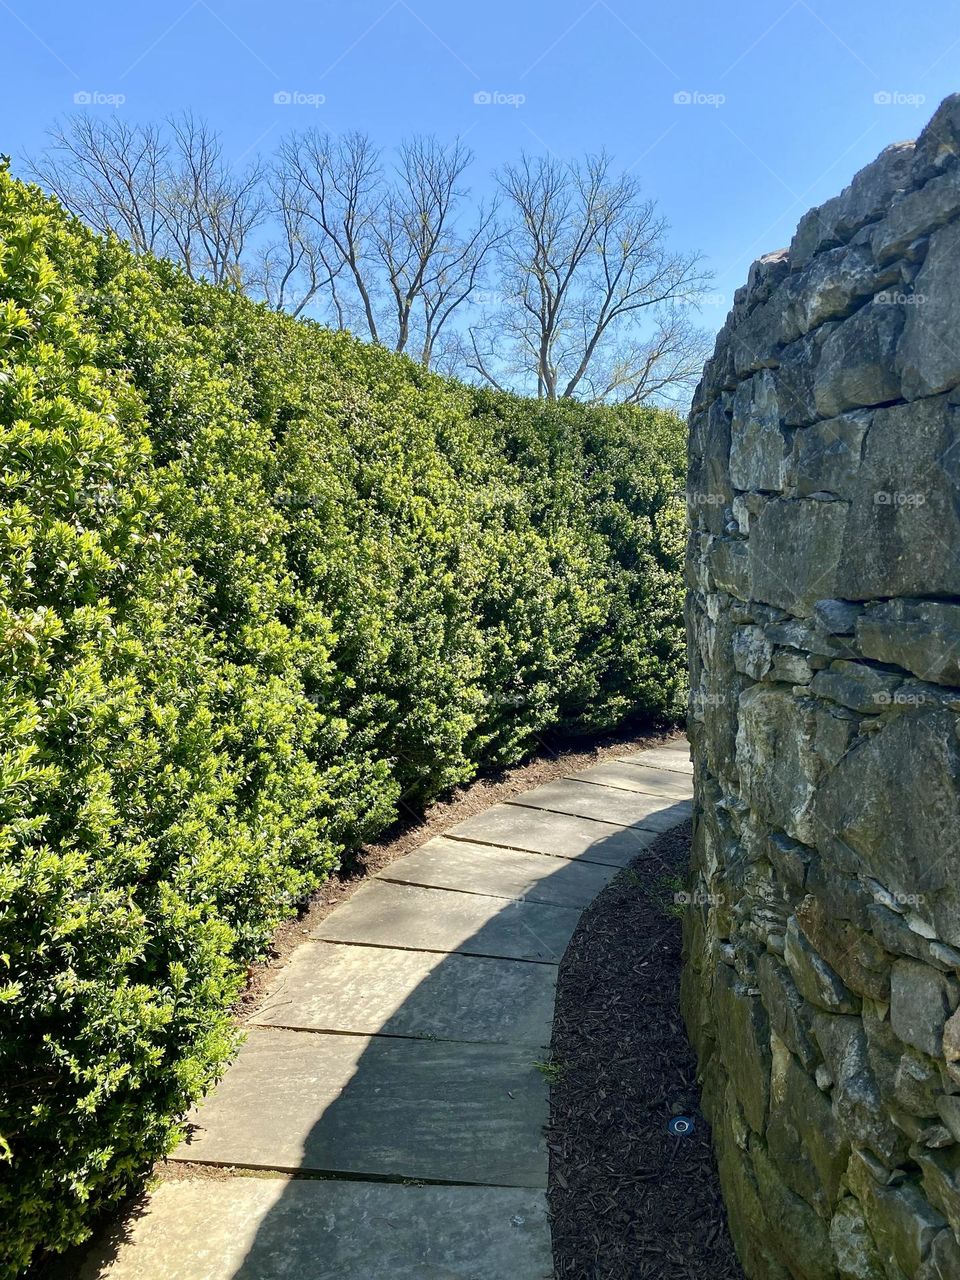 A pathway between hedges and a stone wall